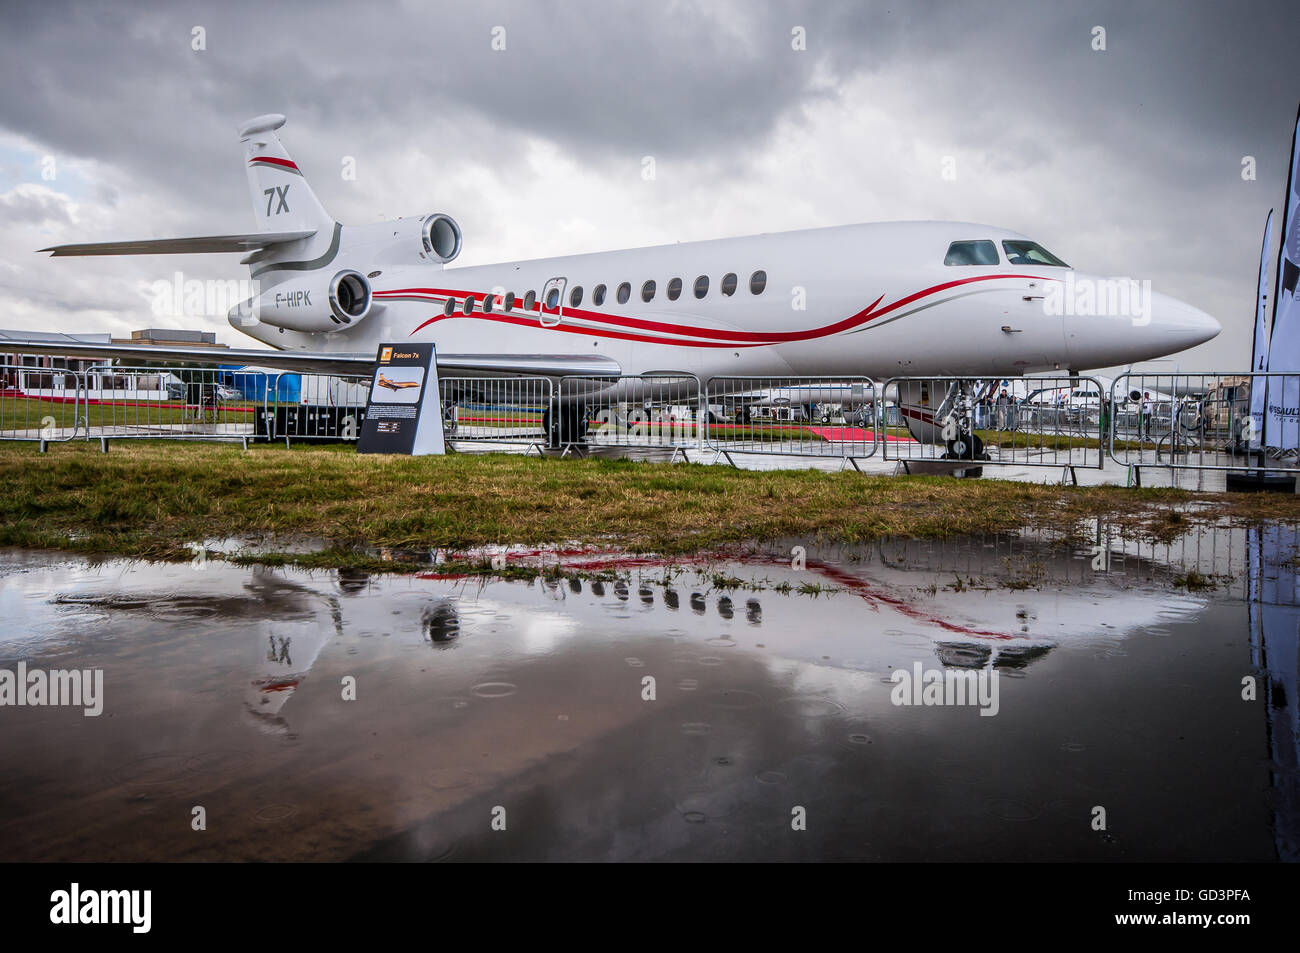 Farnborough International Airshow 2016 was hit by torrential rain, showground was water-logged and some even entered the trade halls. Eventually the whole show day was cancelled with all visitors asked to leave Stock Photo